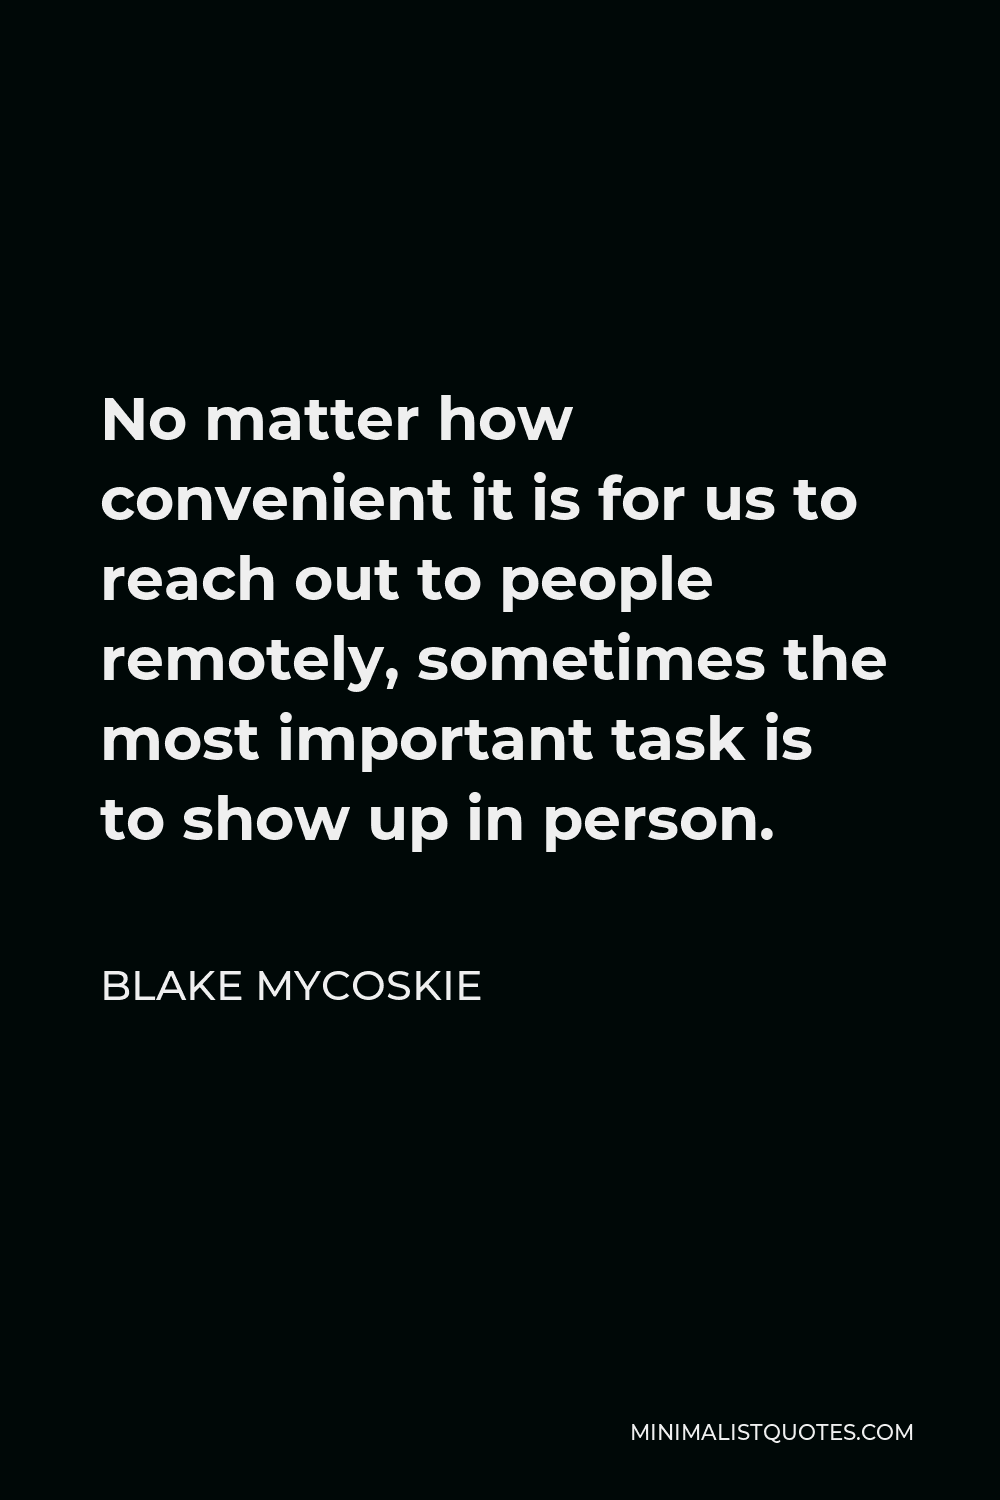 Blake Mycoskie Quote - No matter how convenient it is for us to reach out to people remotely, sometimes the most important task is to show up in person.